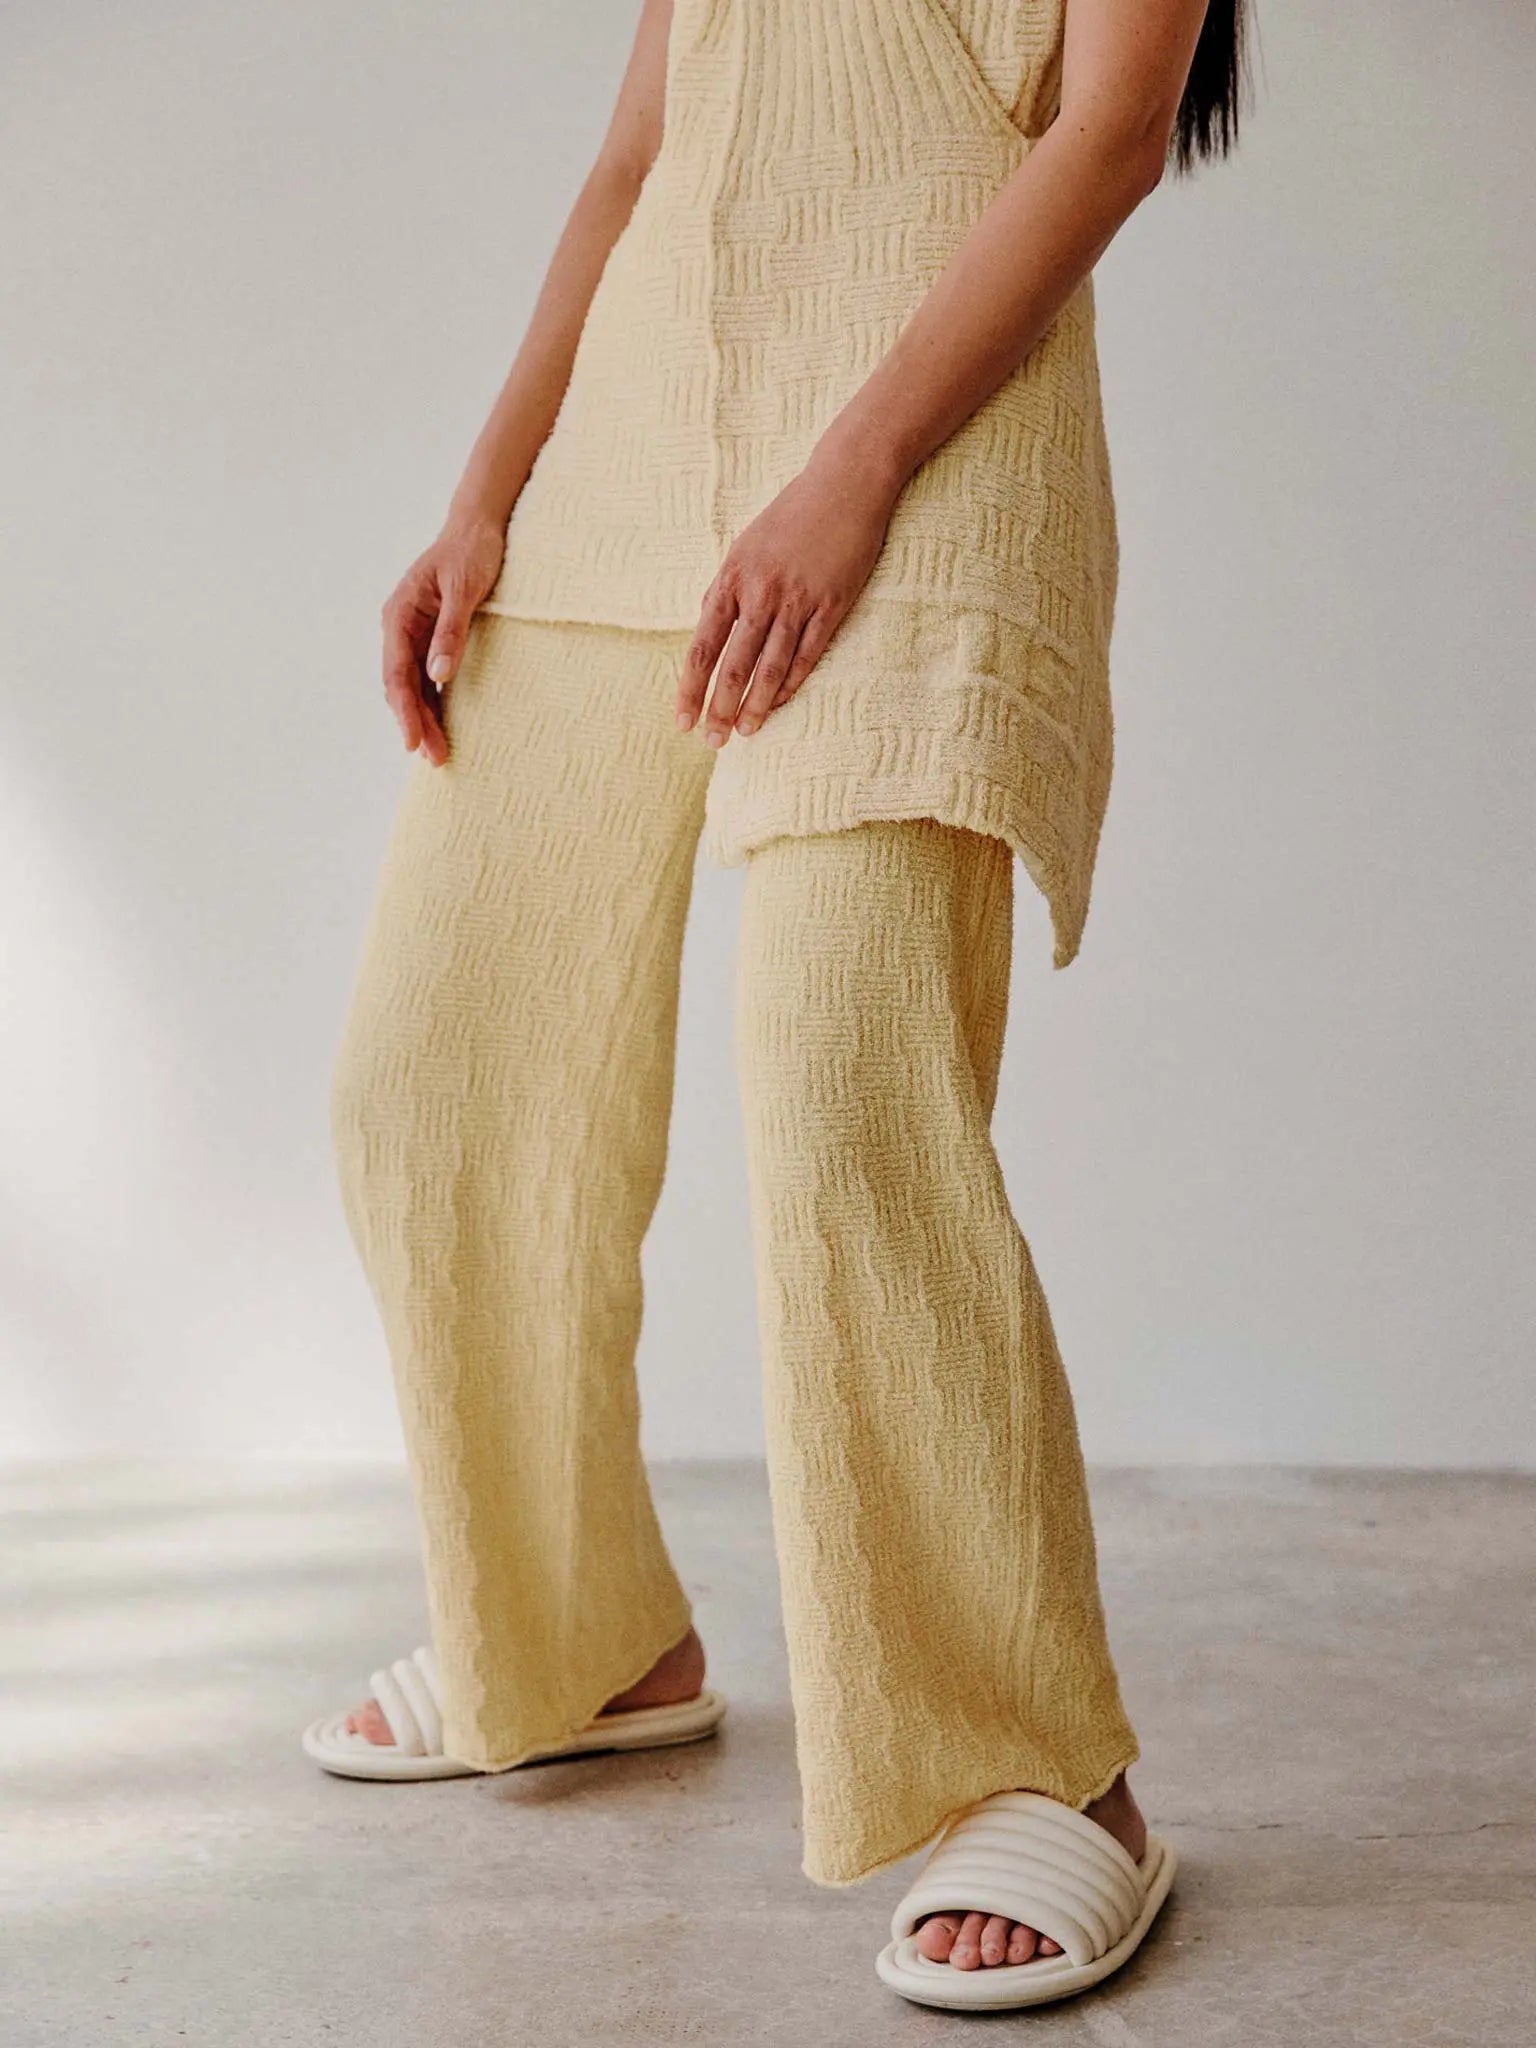 A pair of Tofu Pants Yellow from Rus with a flared leg from BassalStore. The waistband is ribbed, and the pants feature a subtle wavy pattern throughout. The fabric appears soft and cozy, suitable for casual or lounge wear.